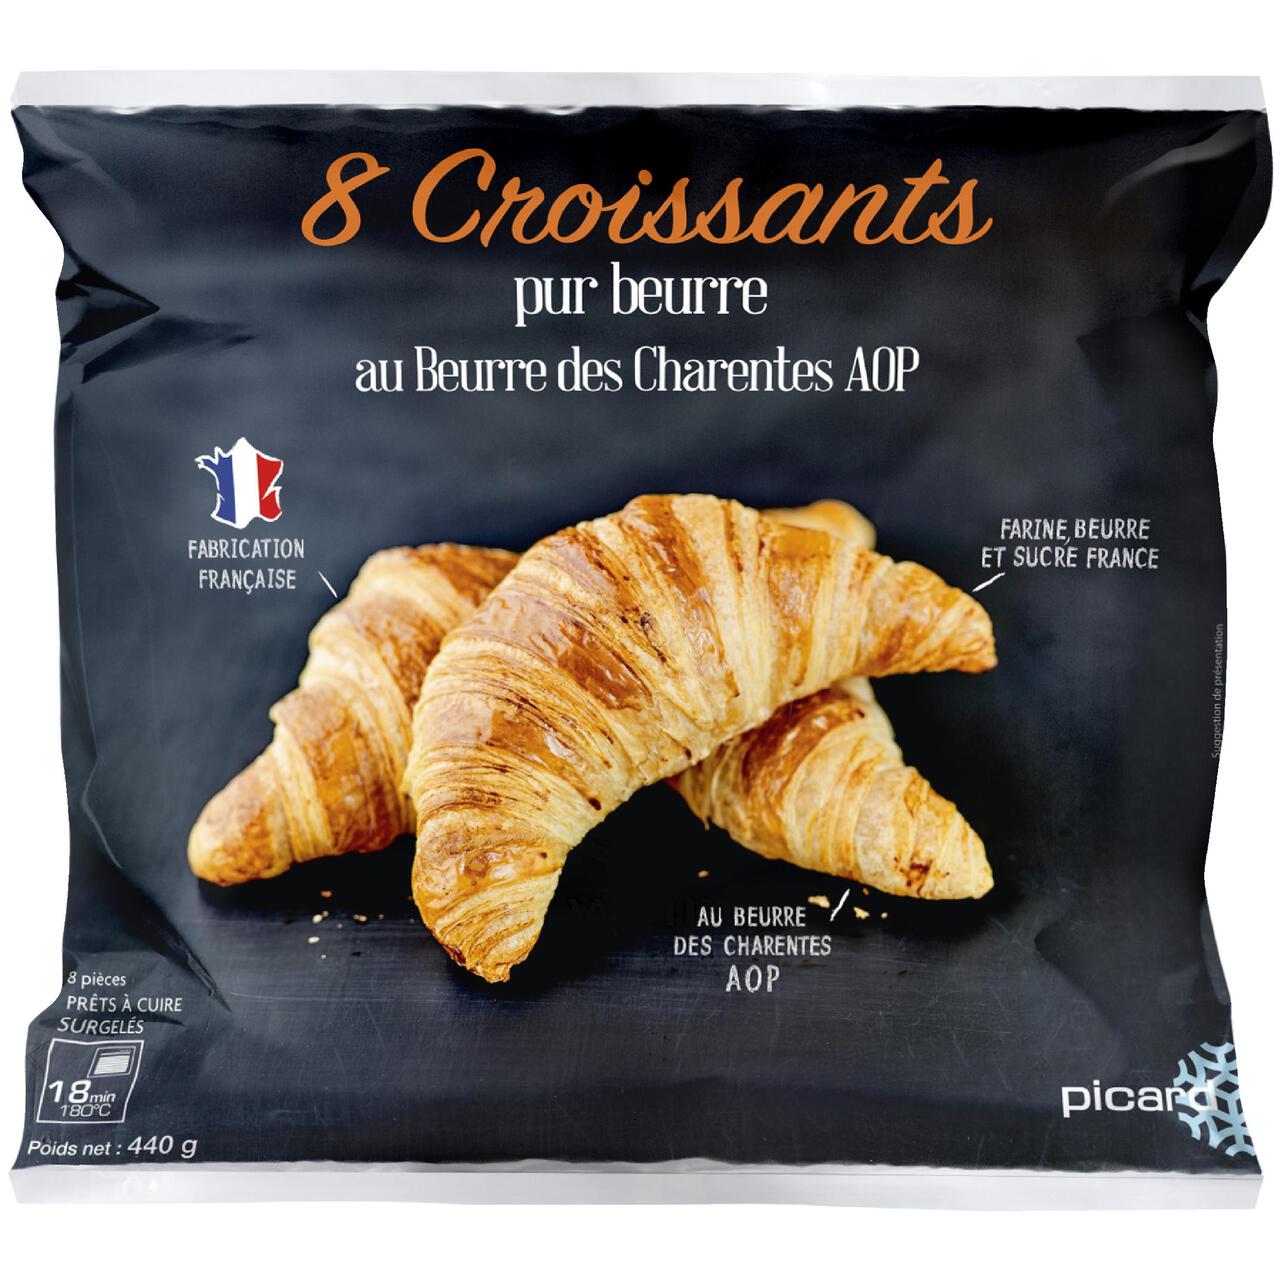 Picard Croissants with Charentes Butter 8 per pack